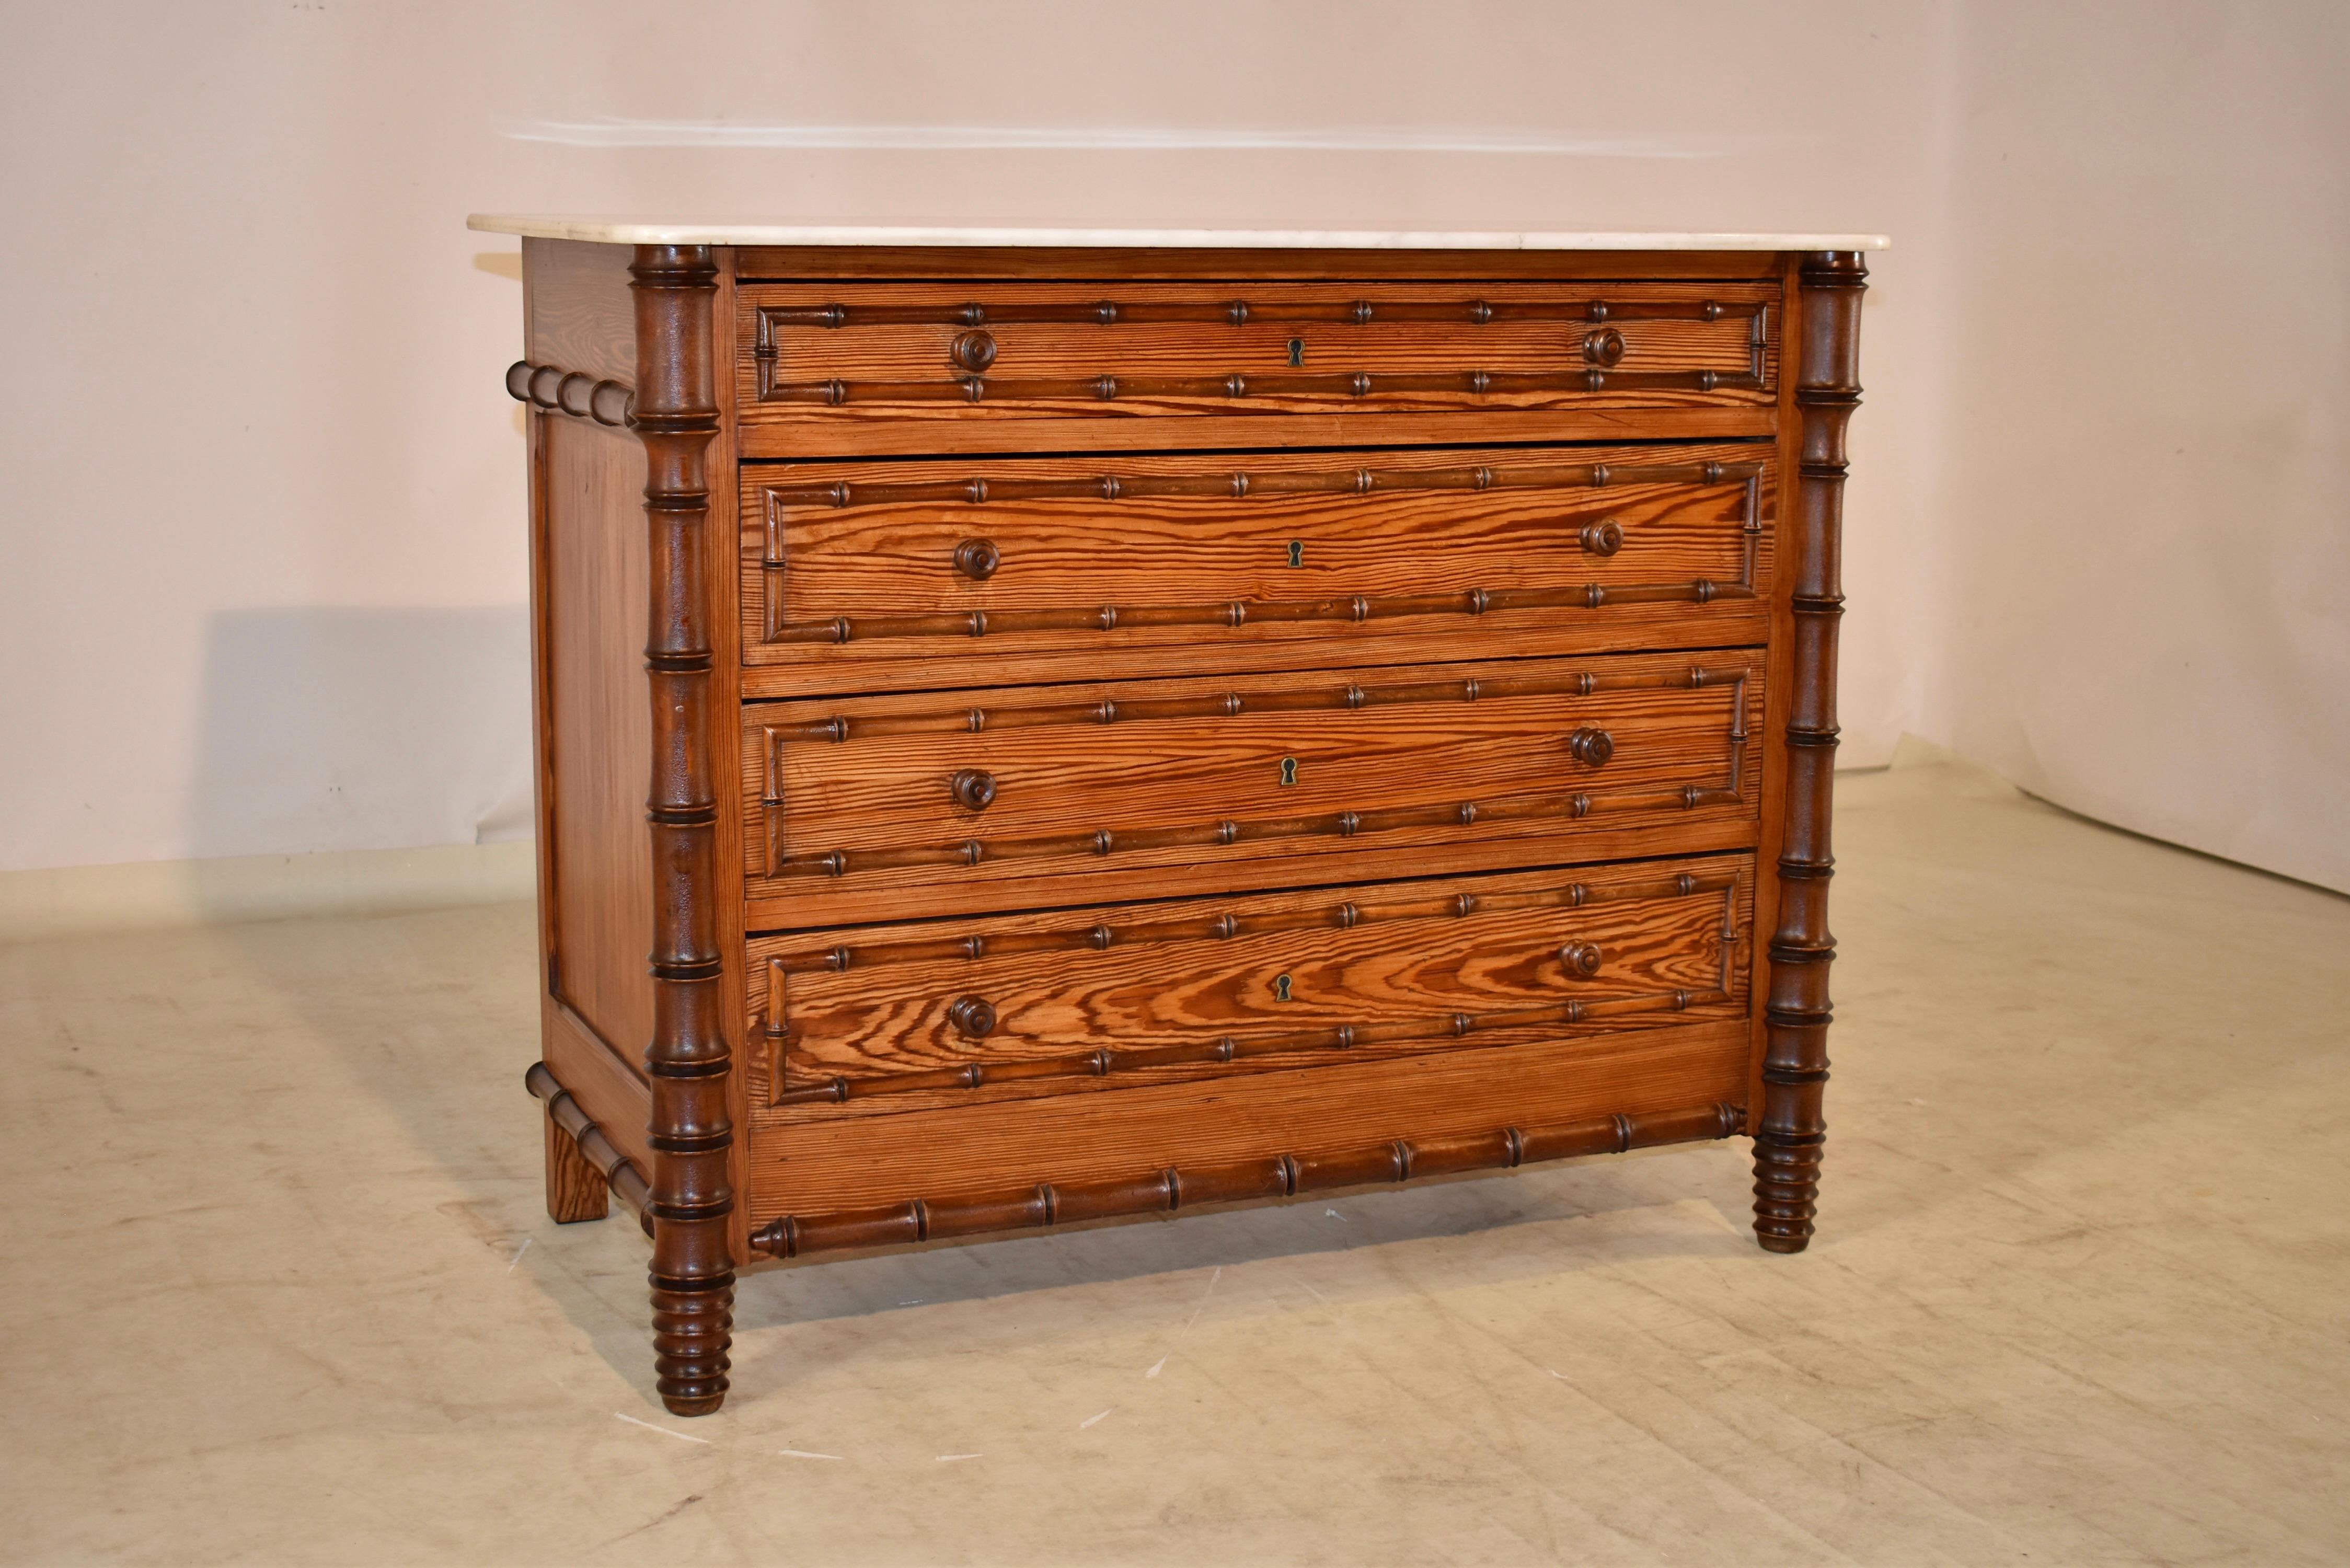 19th century faux bamboo chest of drawers from France with a removable Carrara marble top, following down to a pitch pine case with hand turned cherry wood applied moldings. The case has simple paneled sides with applied turned moldings. The case